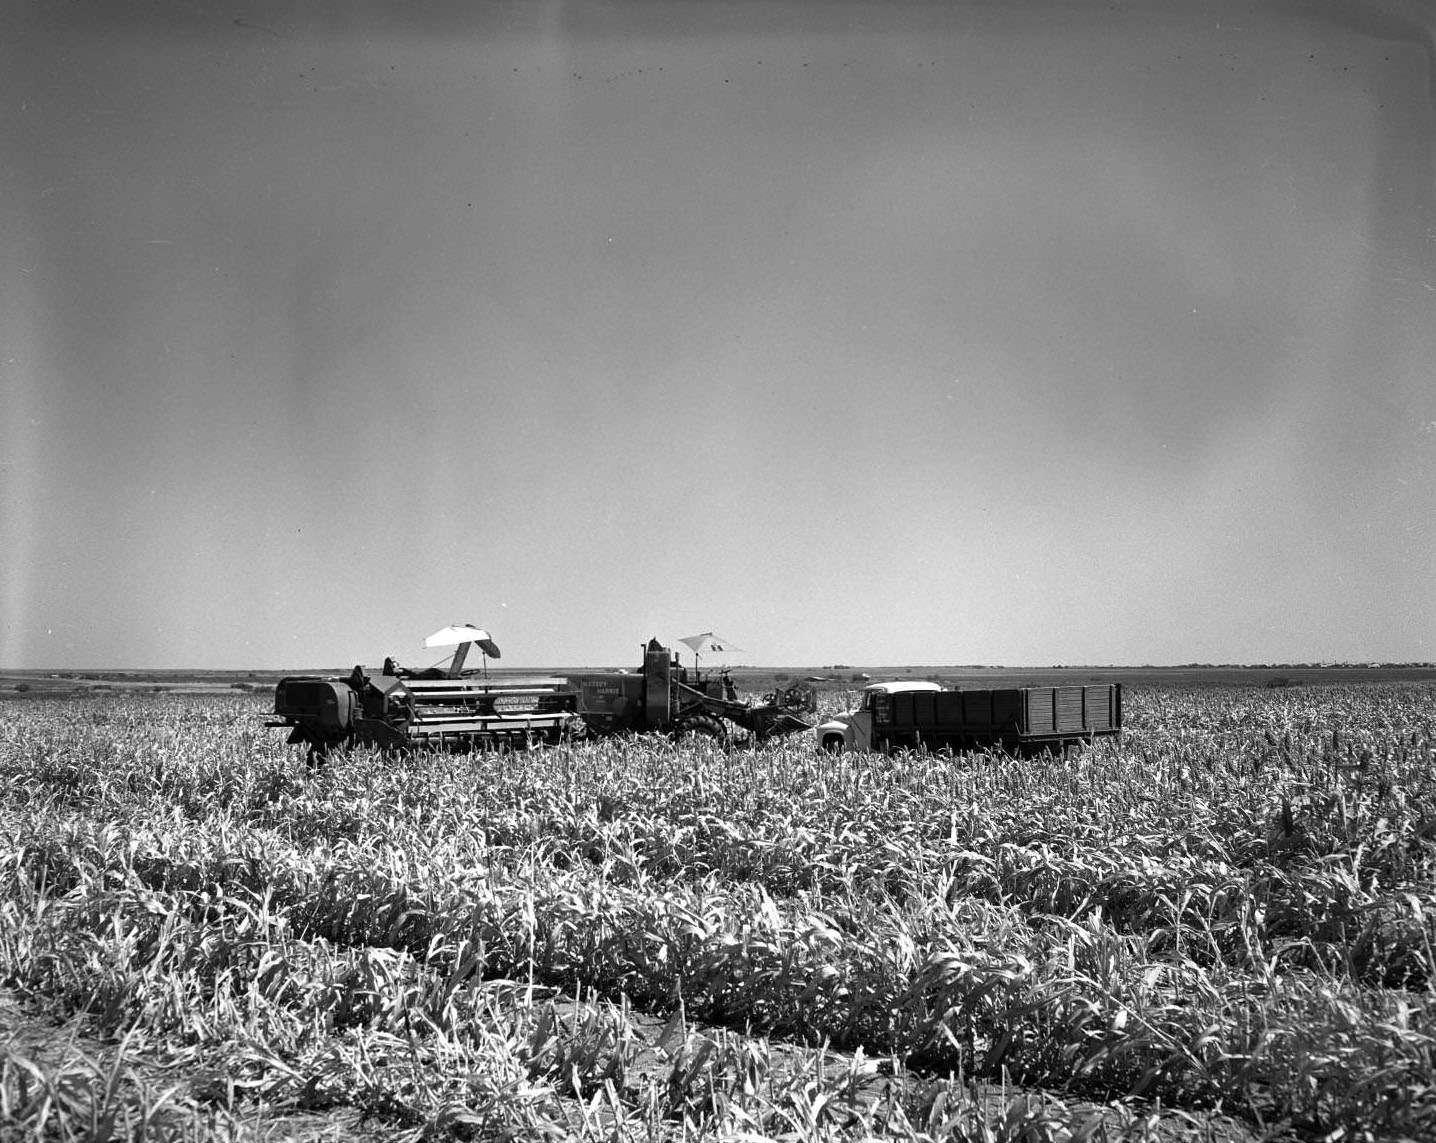 A truck and farming equipment in crops, 1955